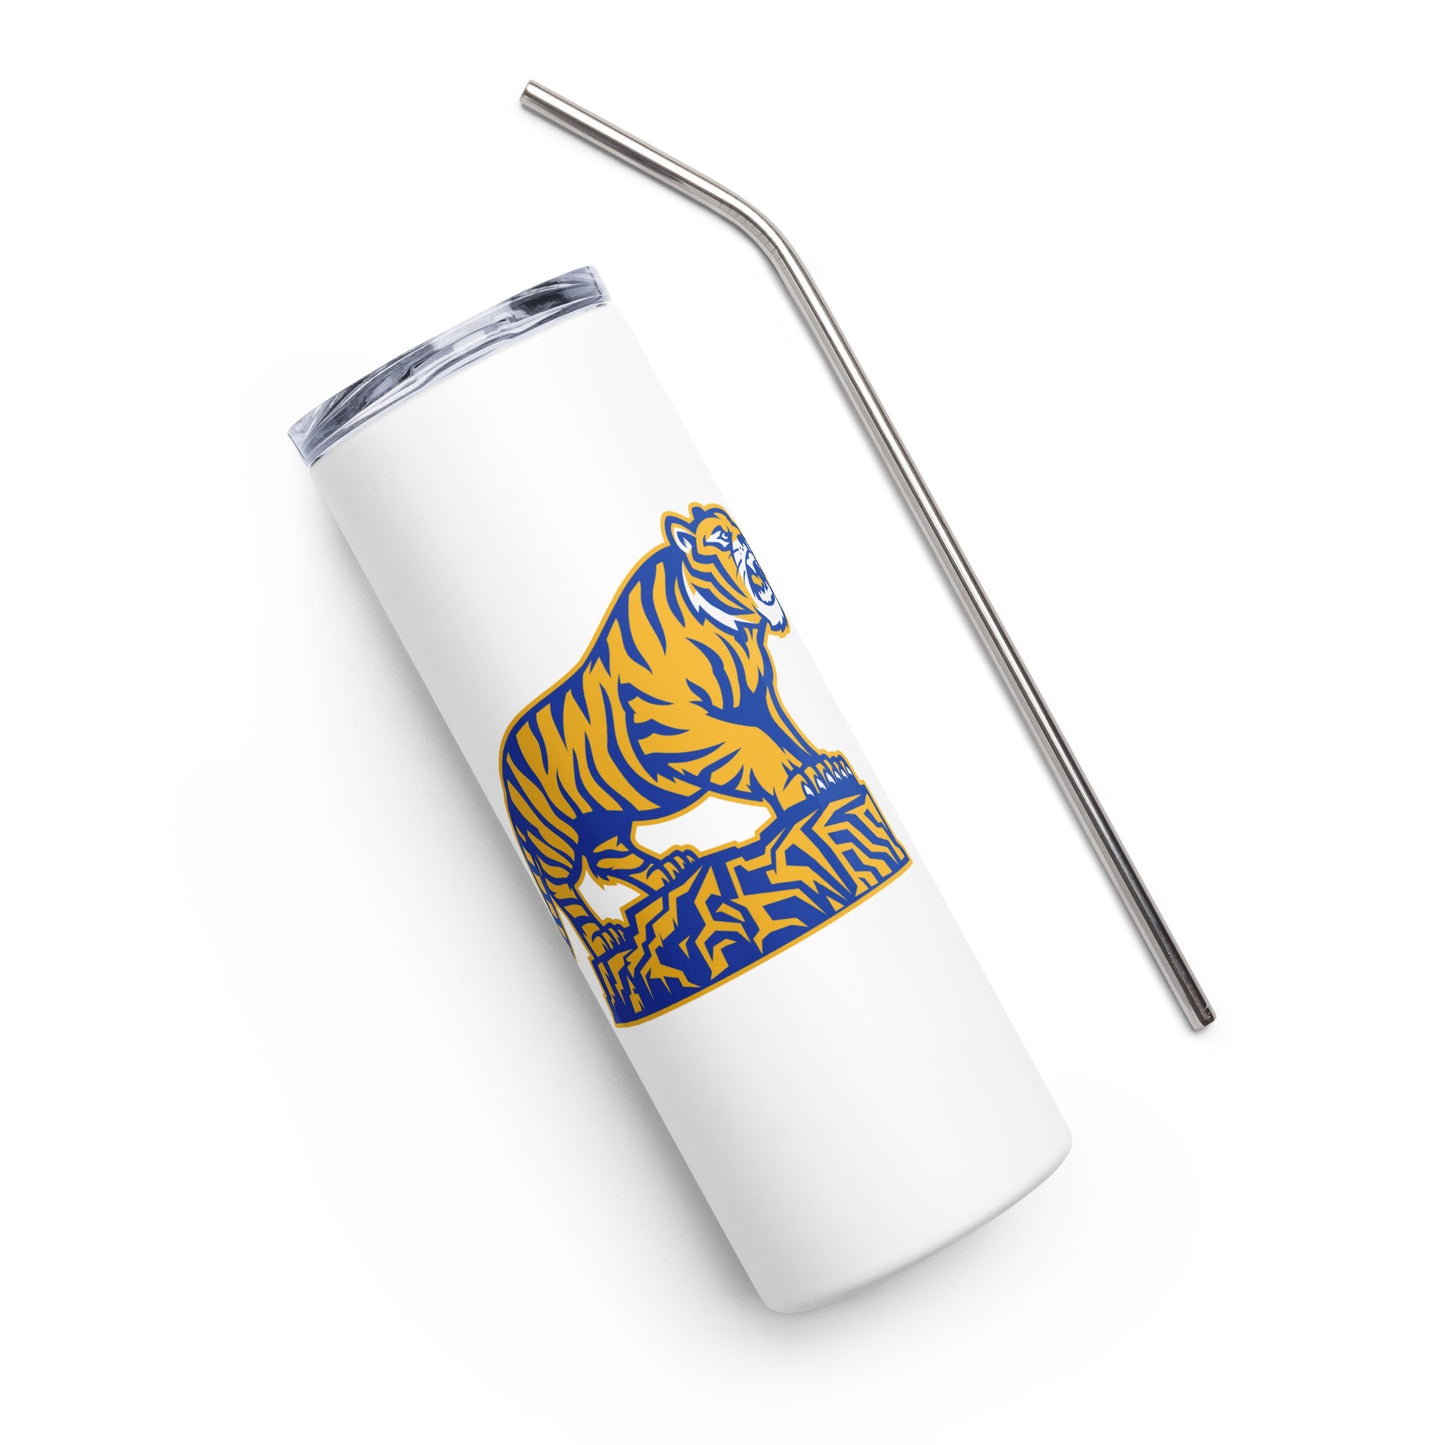 Lincoln Middle School Tumbler